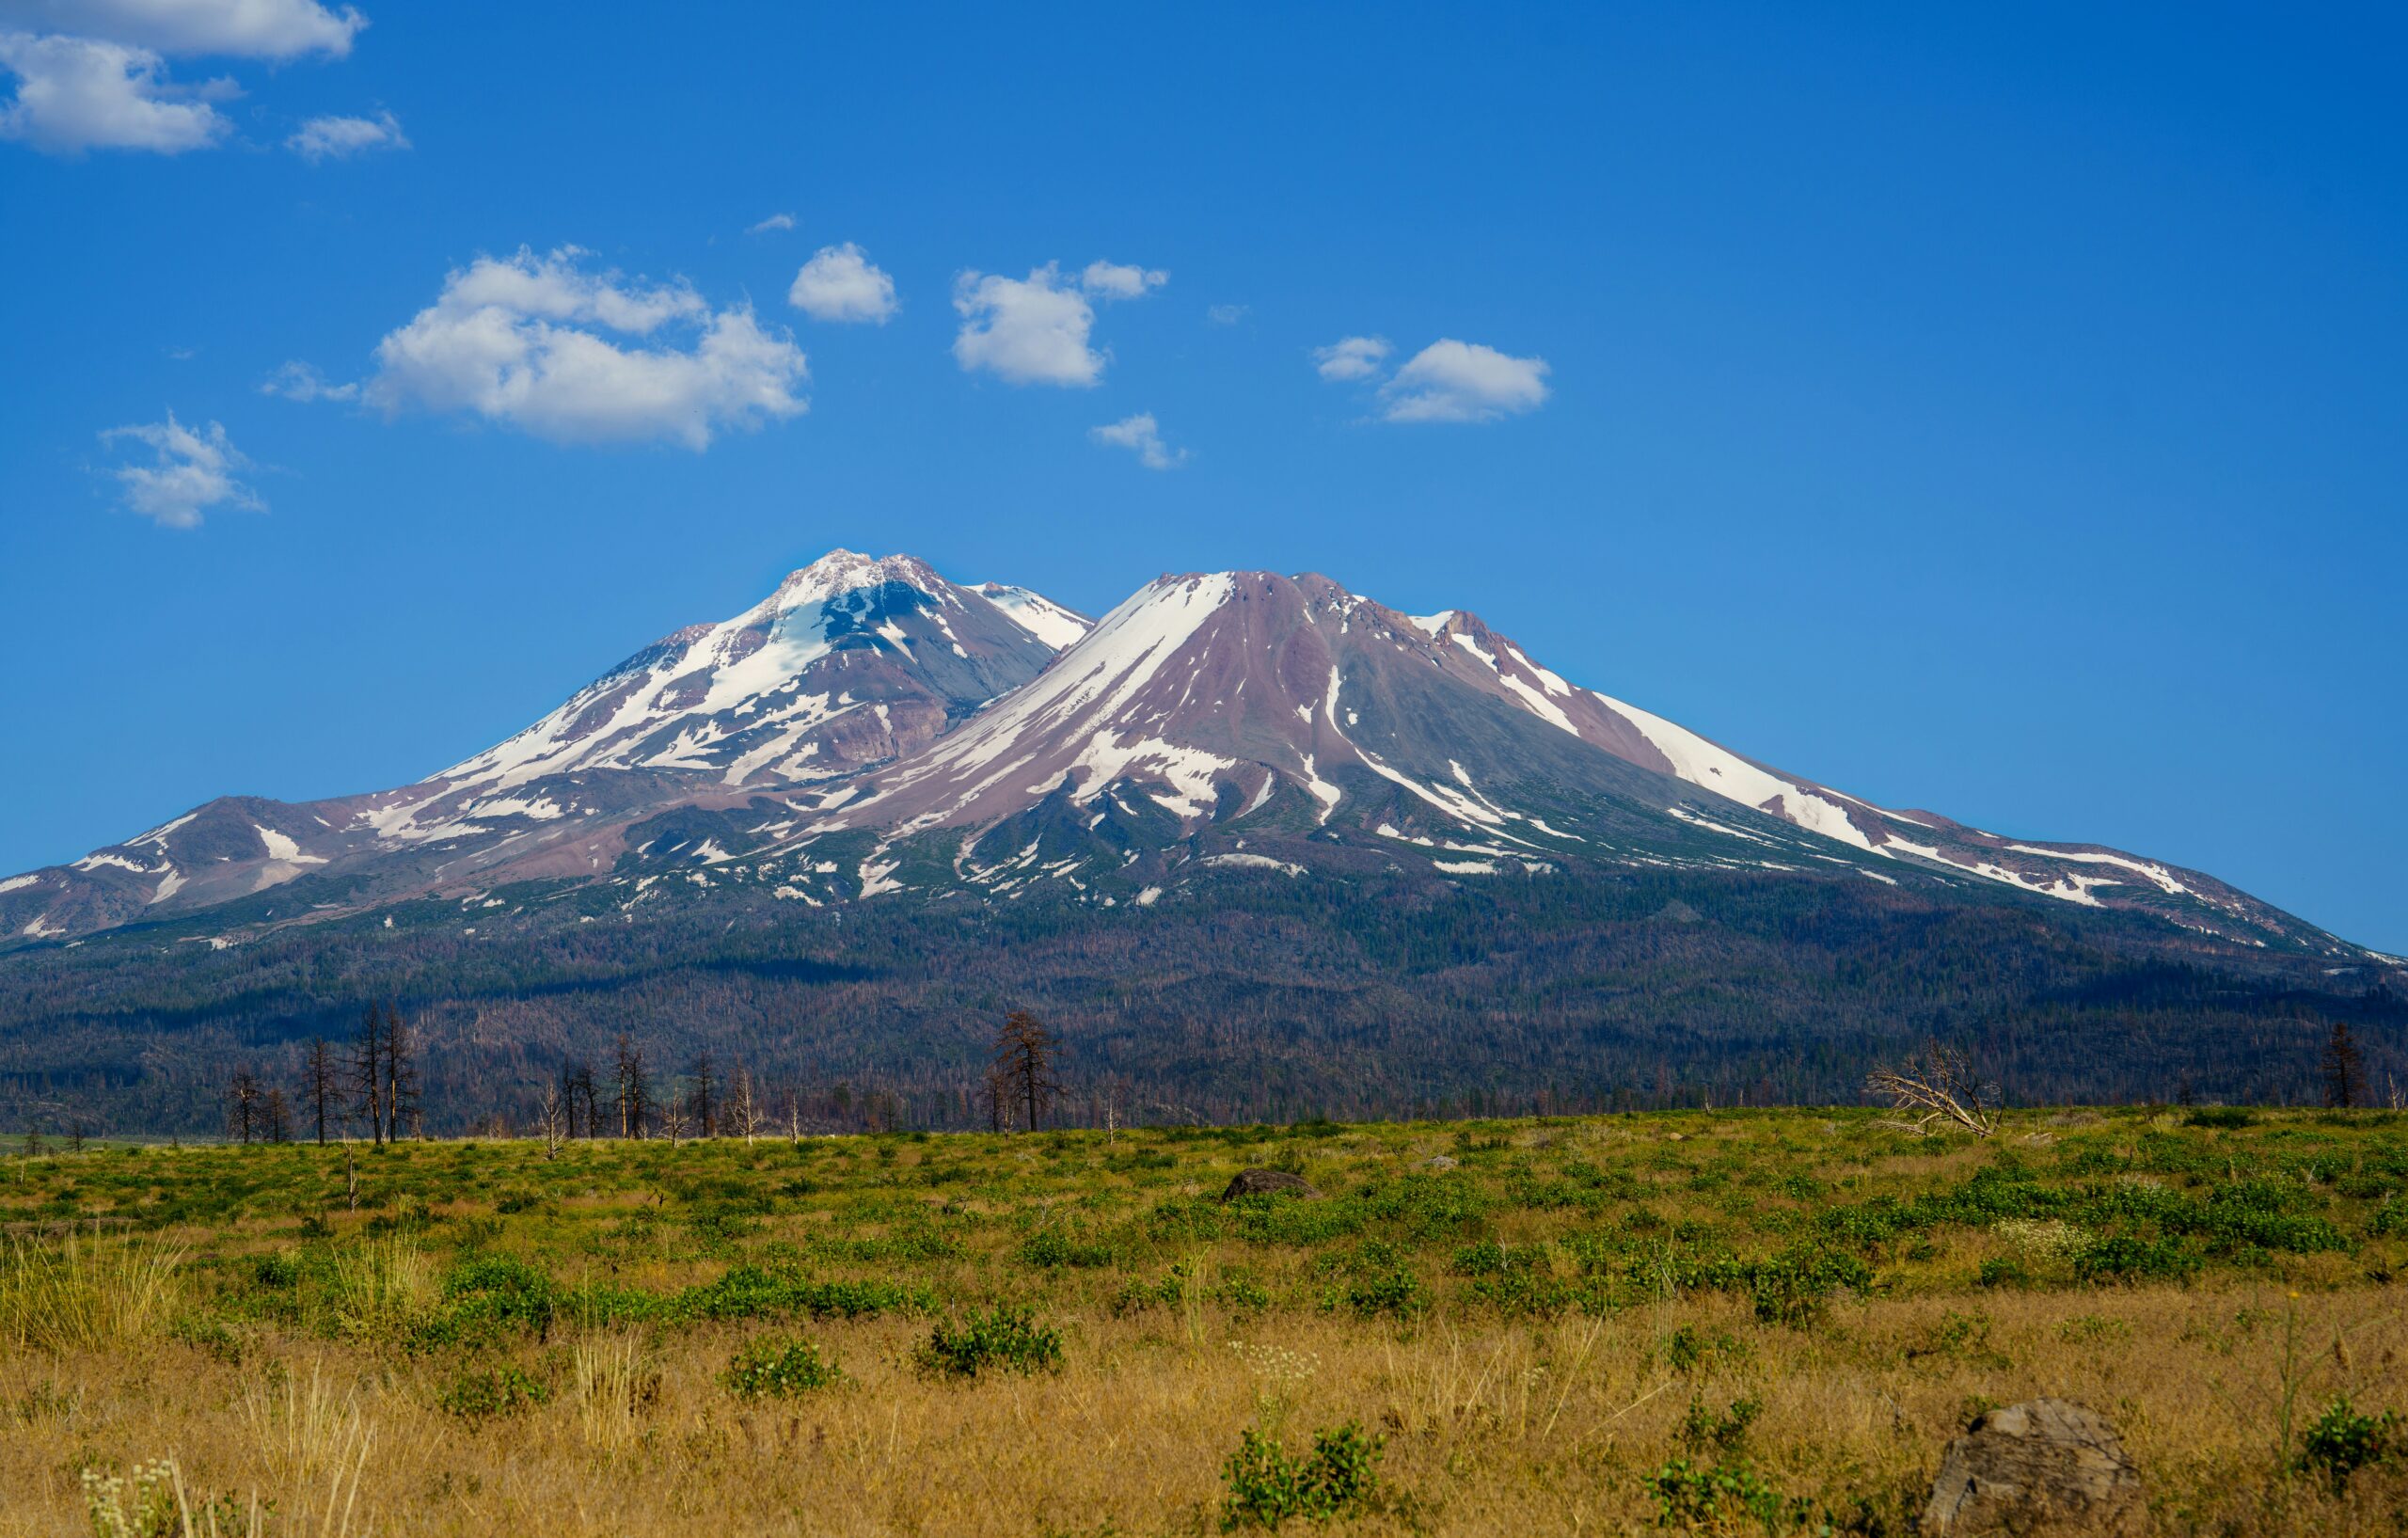 What Is The Main Cause Of Fatalities While Climbing Mount Shasta?